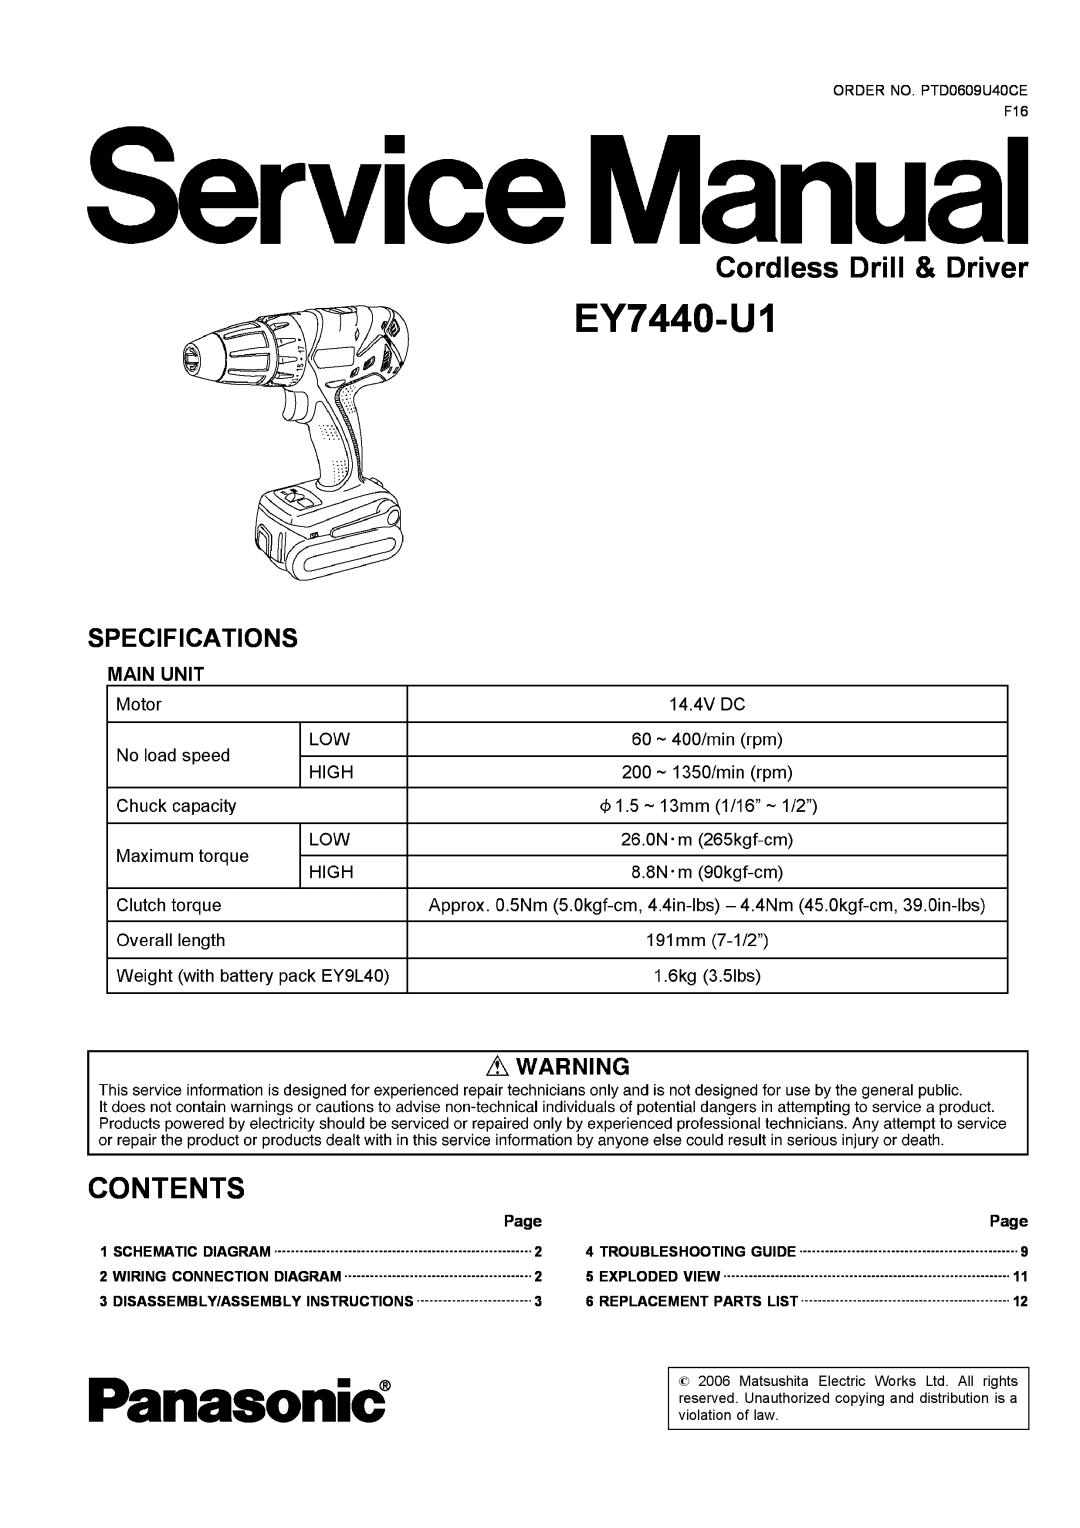 Panasonic EY7440-U1 specifications Page, Schematic Diagram, Troubleshooting Guide, Wiring Connection Diagram, Contents 